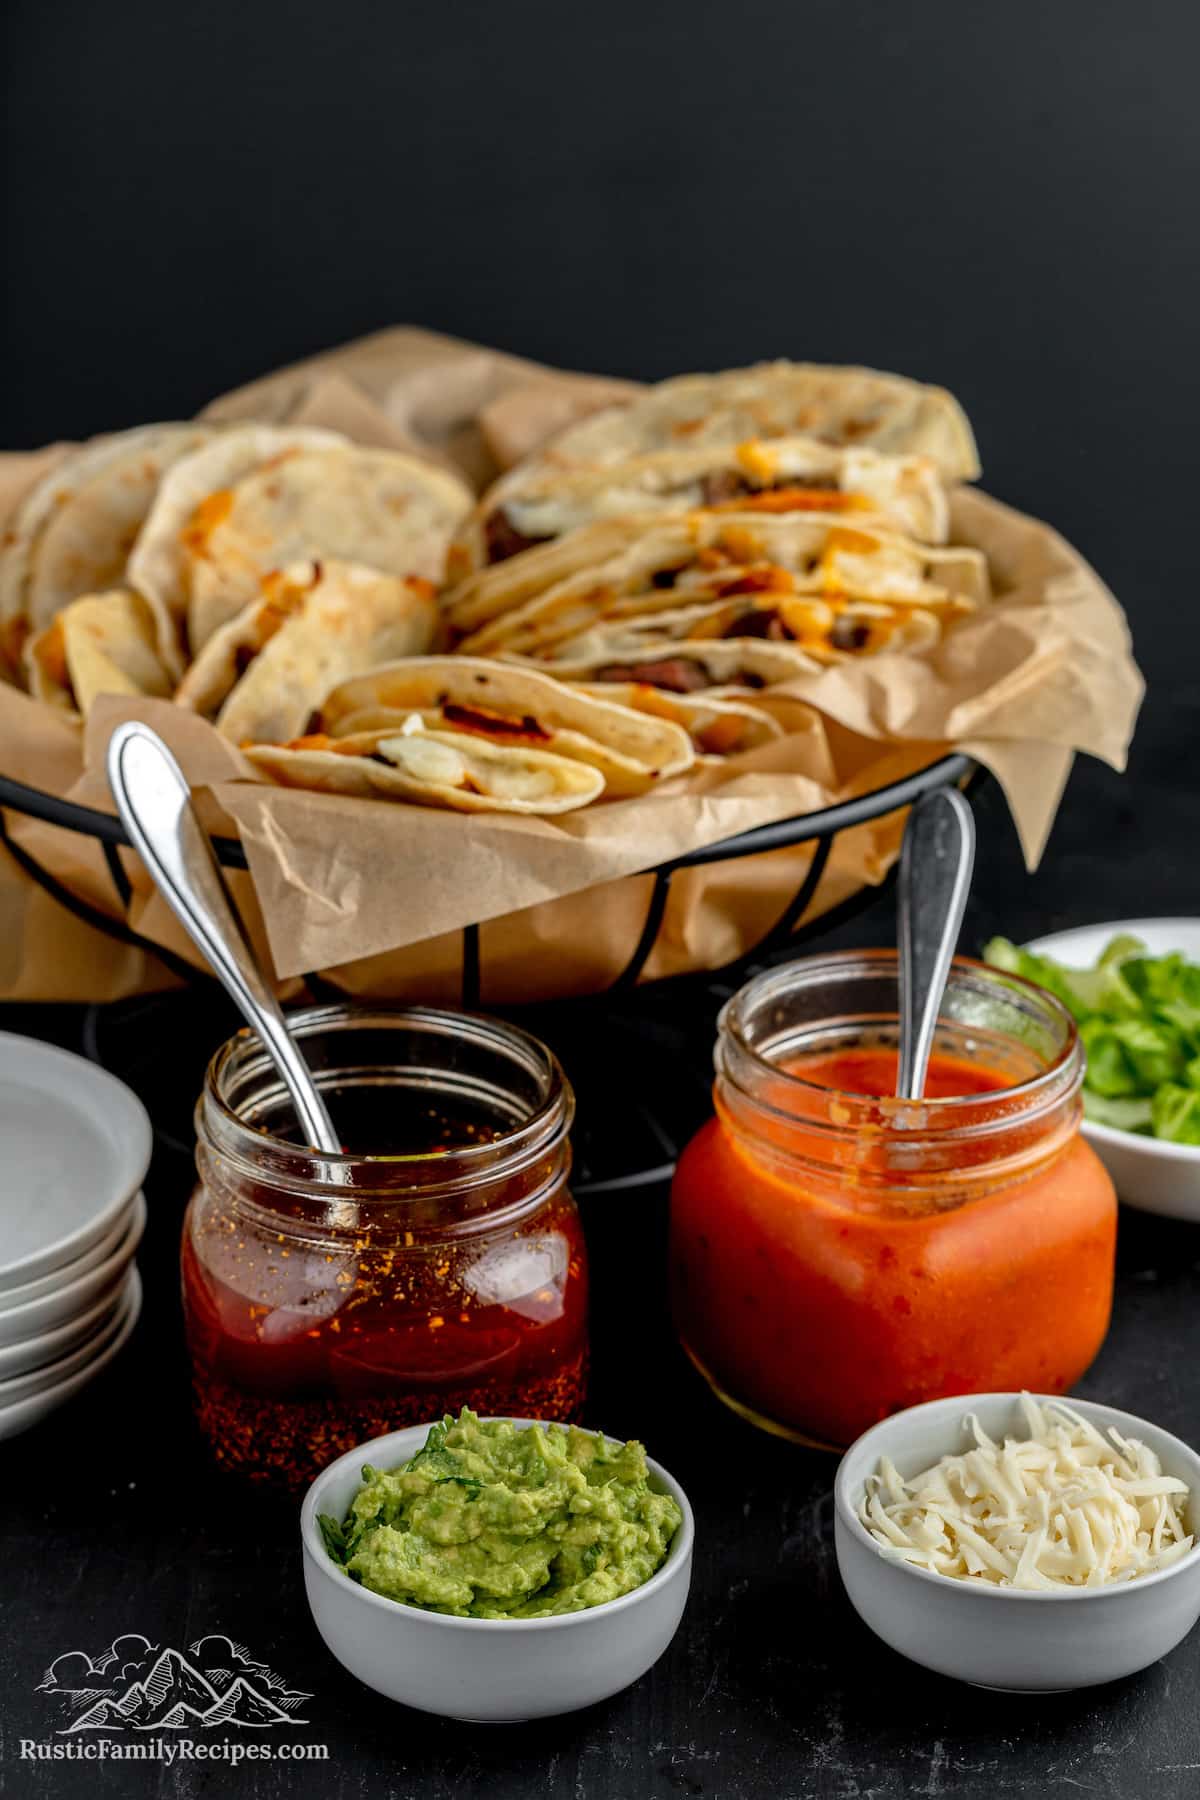 A basket of tacos with guacamole and salsa macha